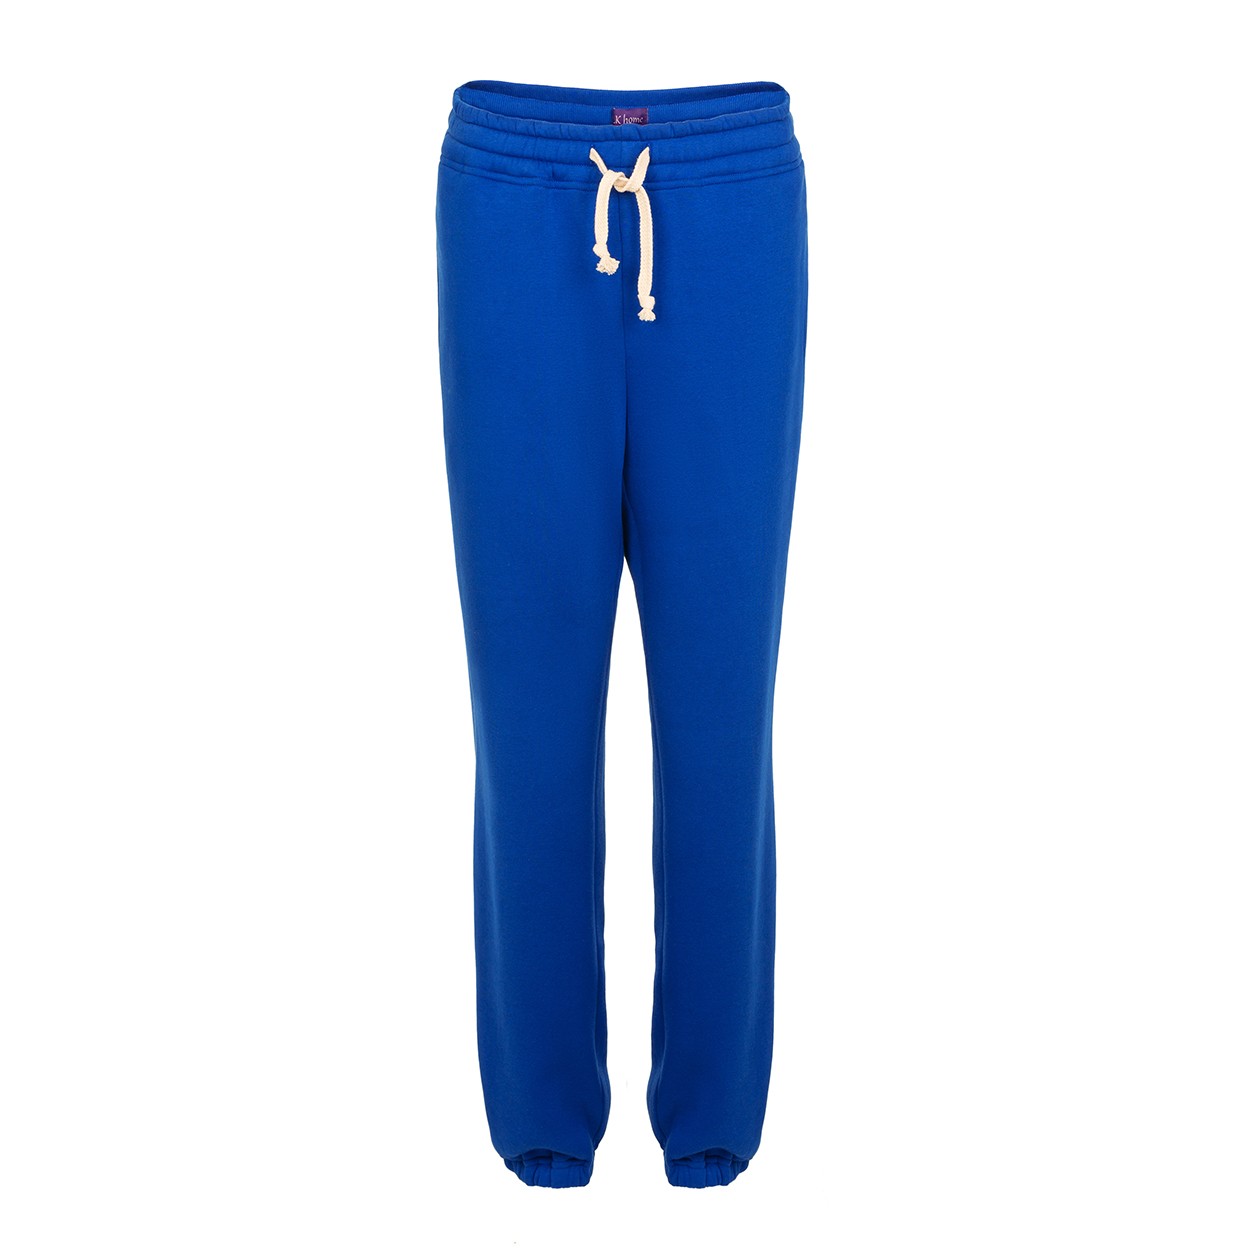 Blue footer pants with an elastic band